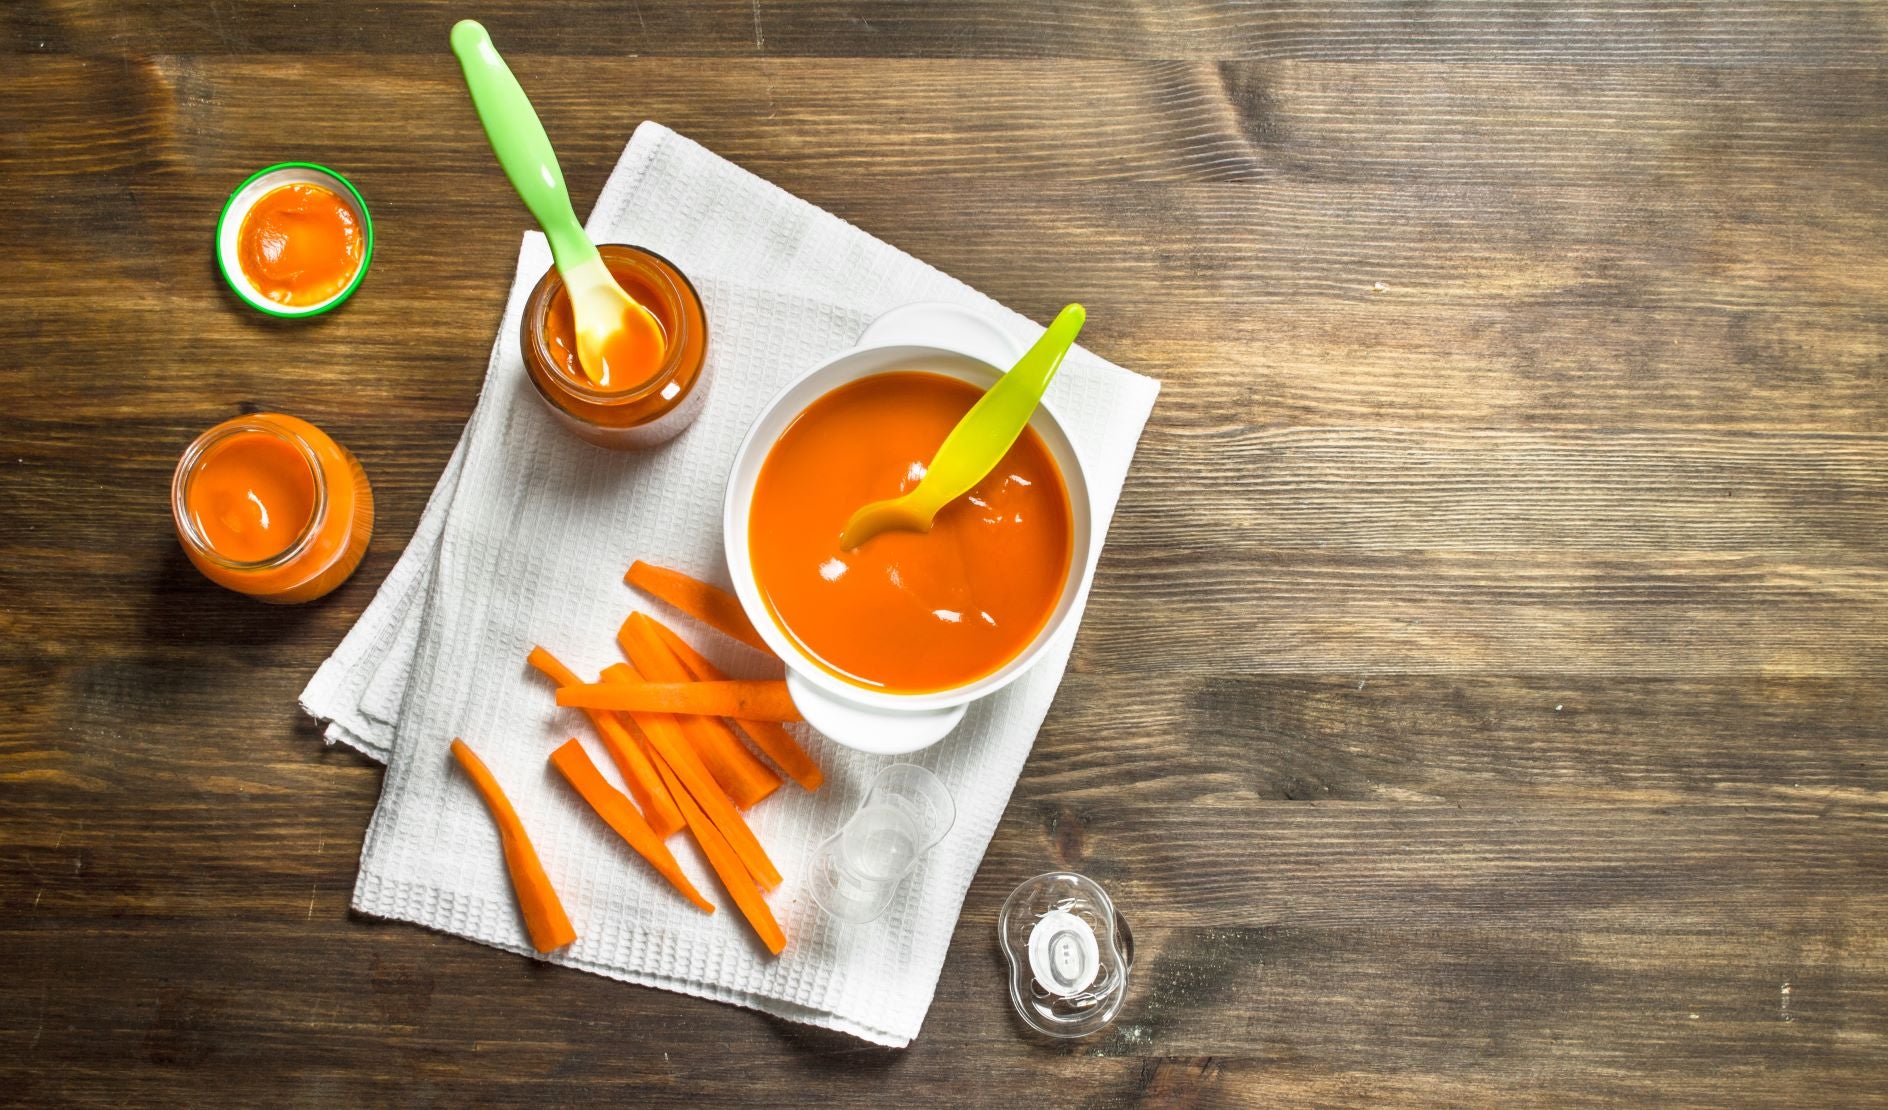 A jar and a bowl of pureed carrot baby food alongside slices of carrots on a wooden surface. Carrots are some of the best foods for babies.